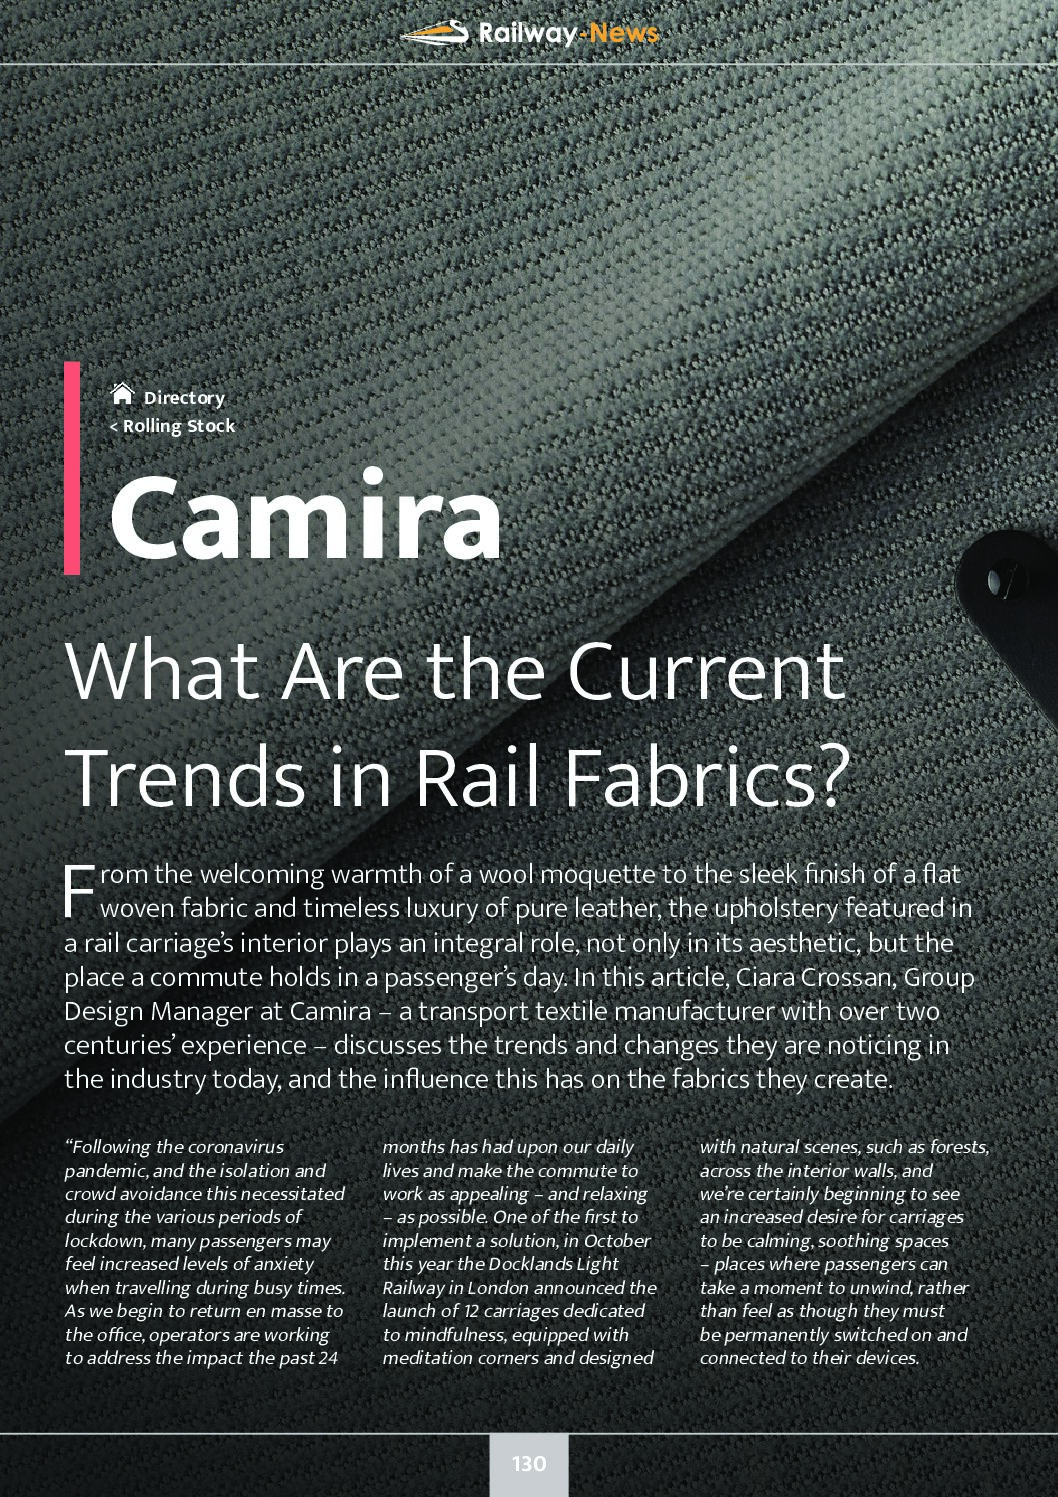 What Are the Current Trends in Rail Fabrics?